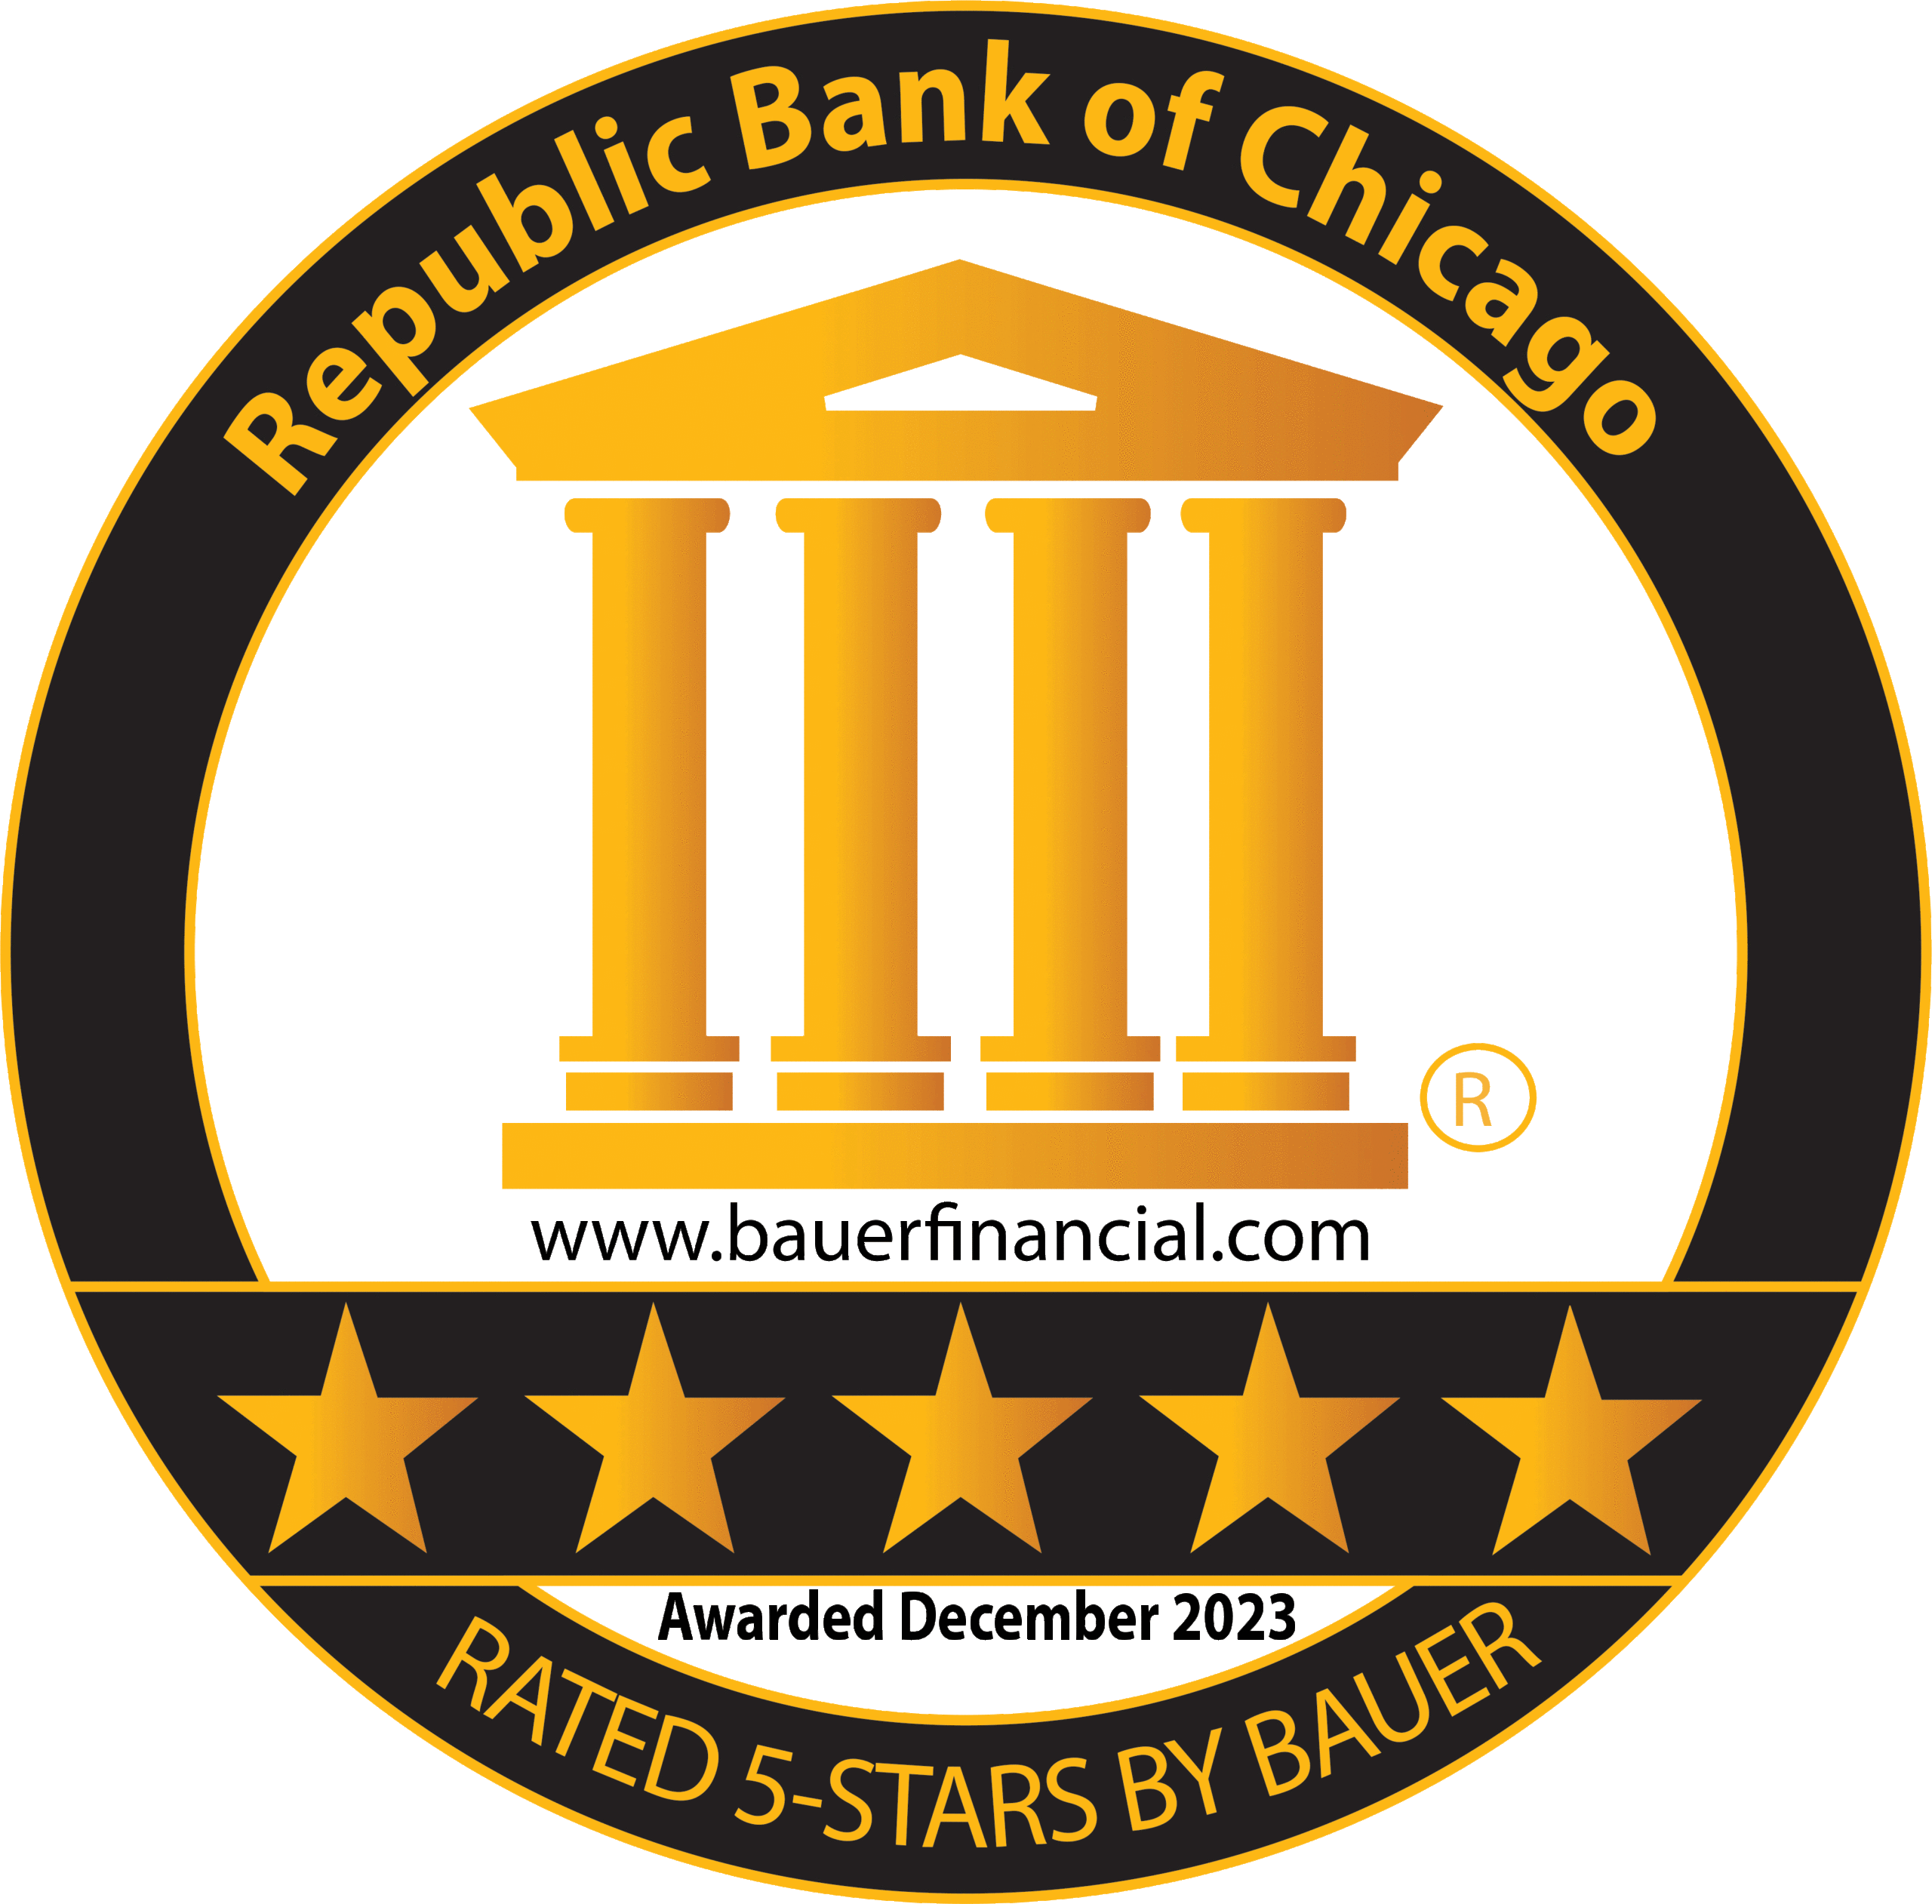 Republic Bank is Rated 5-Stars